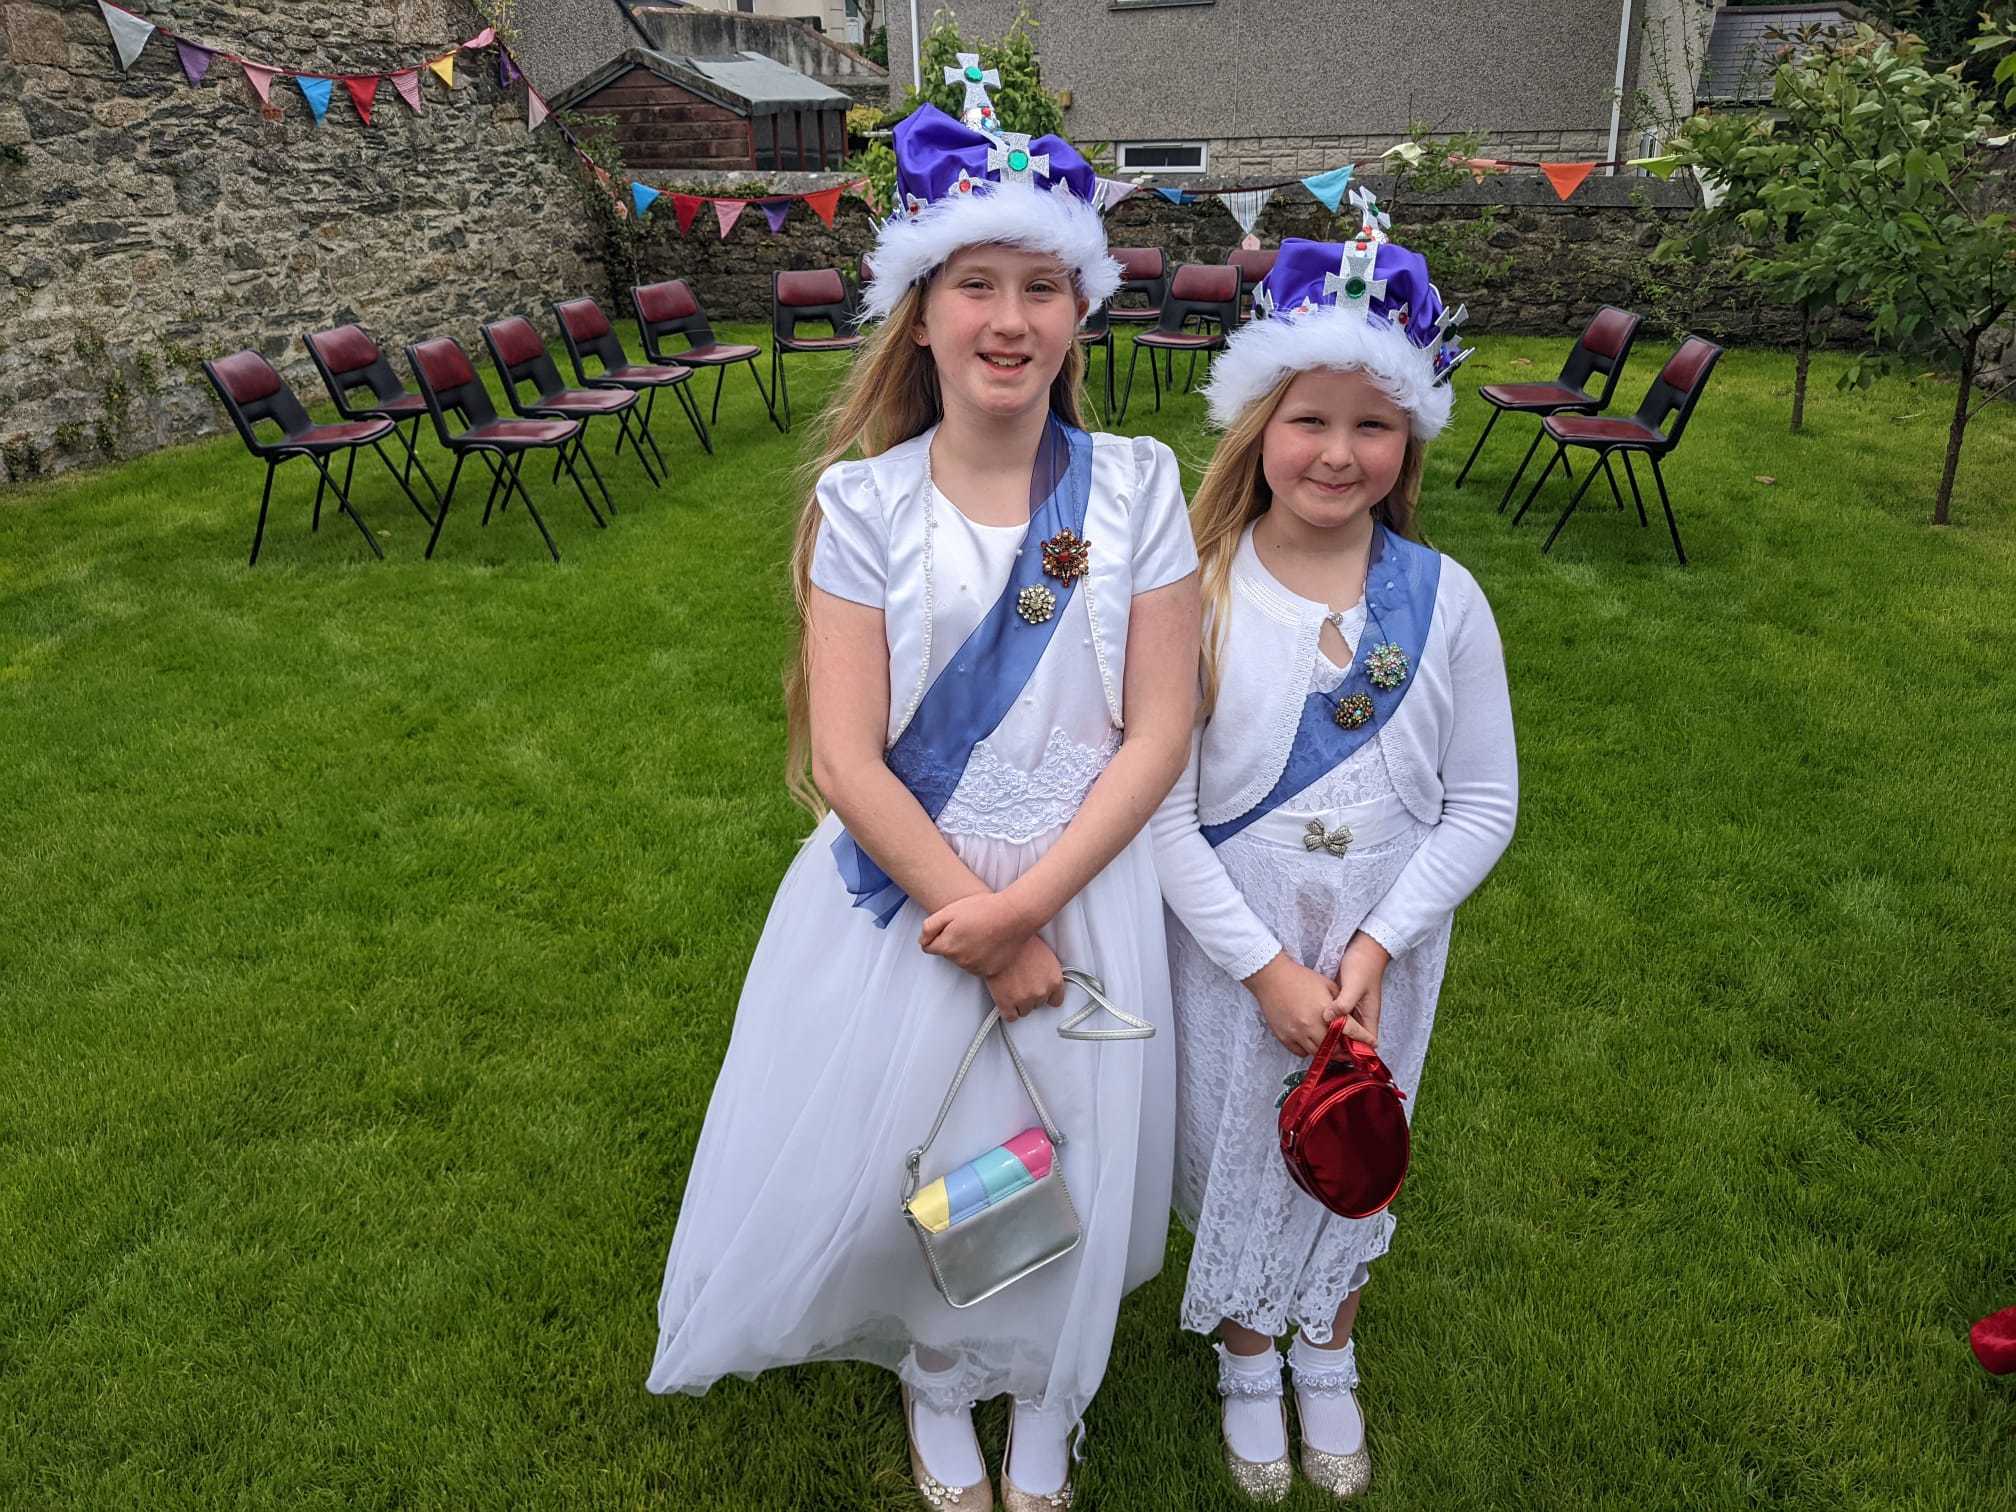 Sisters Polly, 10 and Kitty dressed up as princesses as part of a fancy dress competition